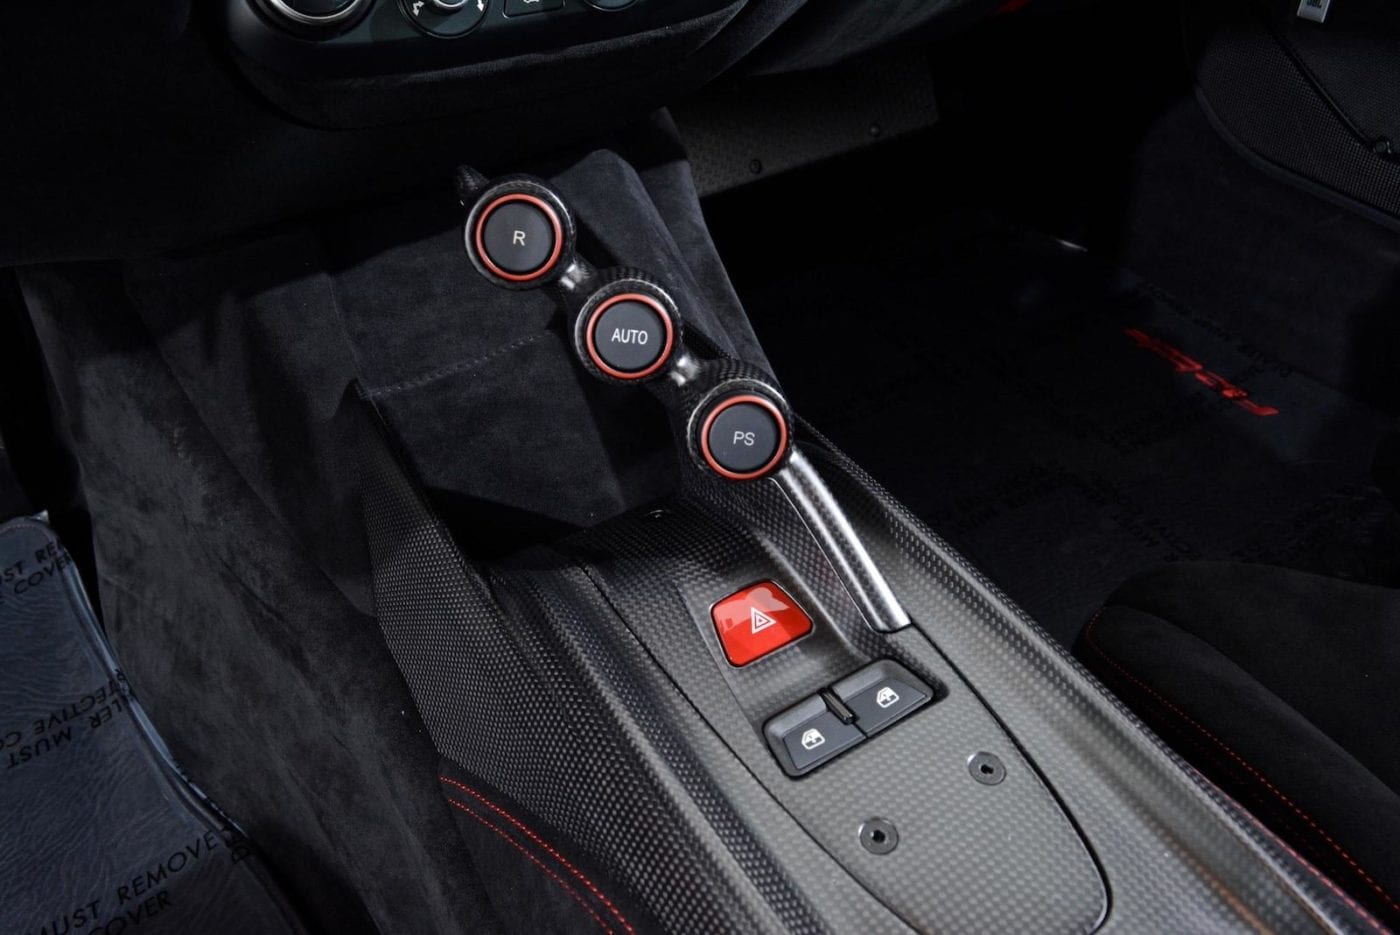 These are the controls for the Ferrari F12tdf transmission.